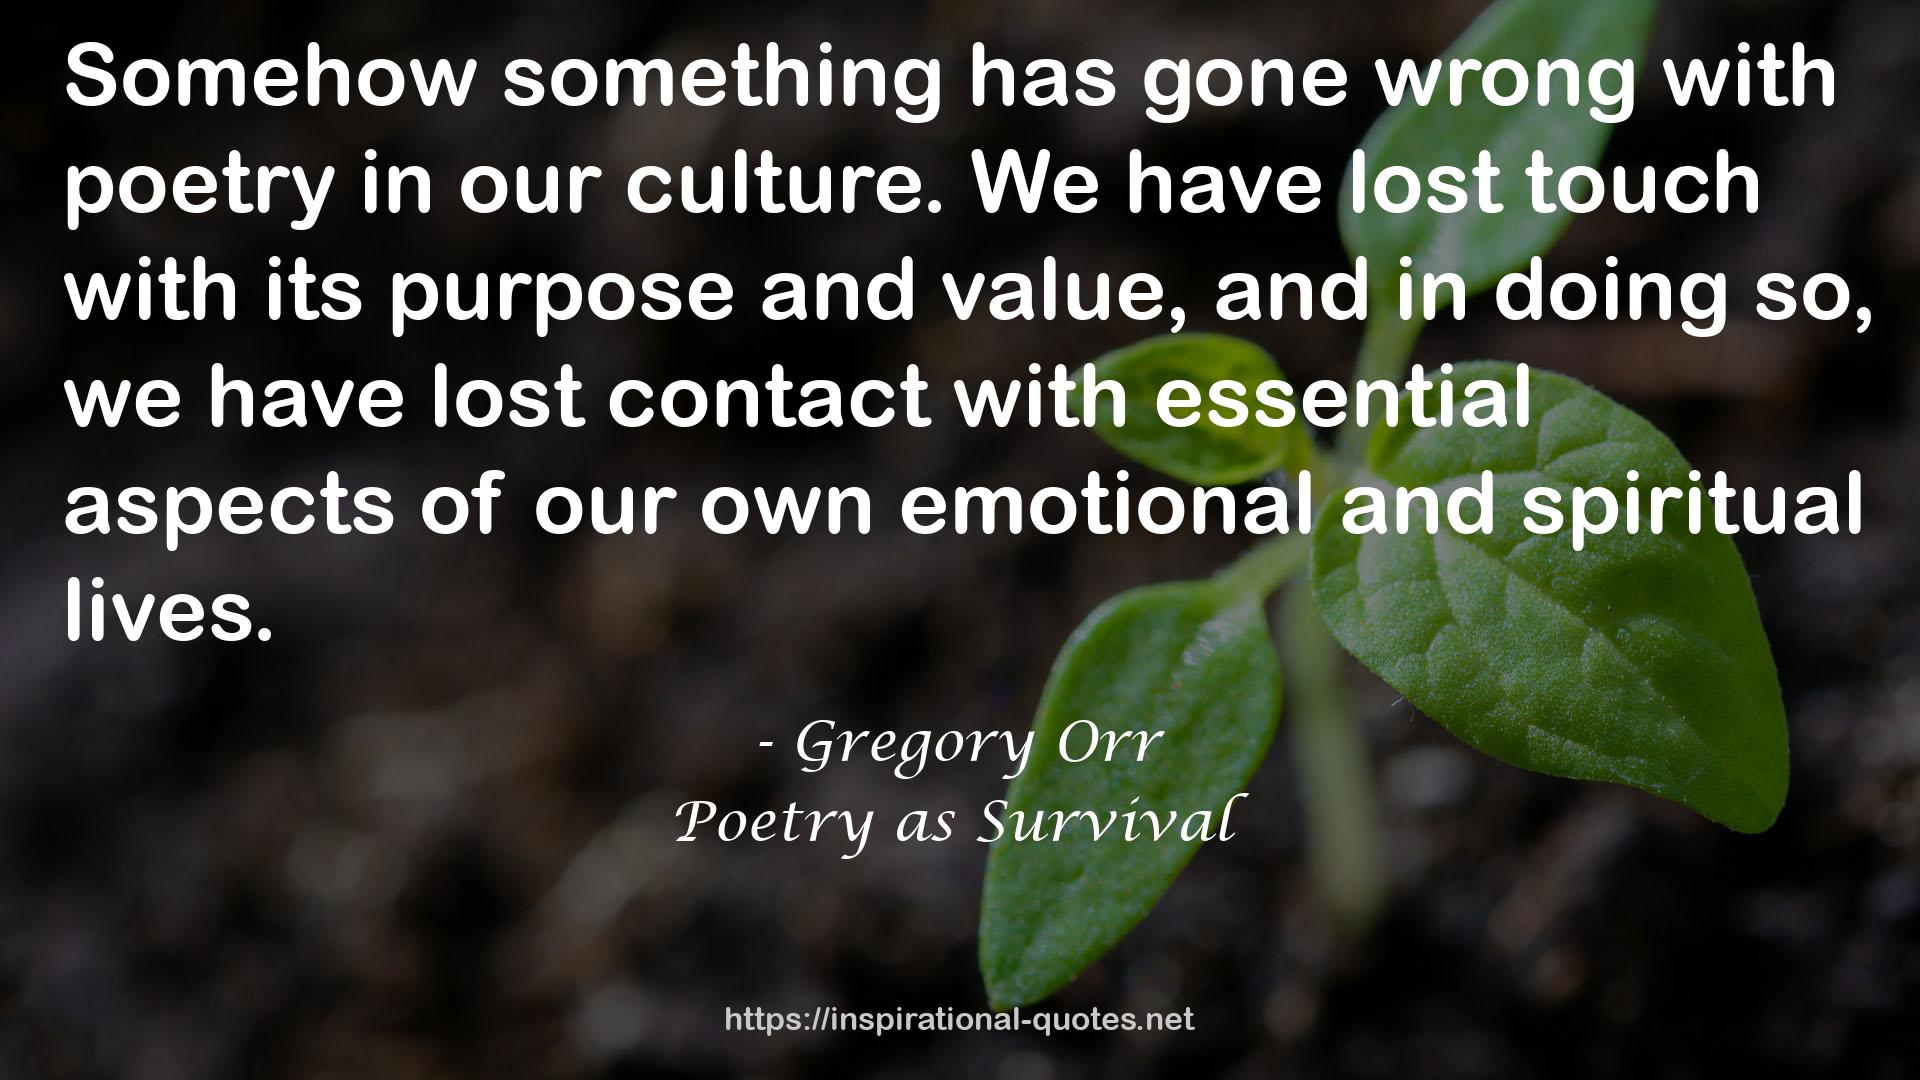 Poetry as Survival QUOTES